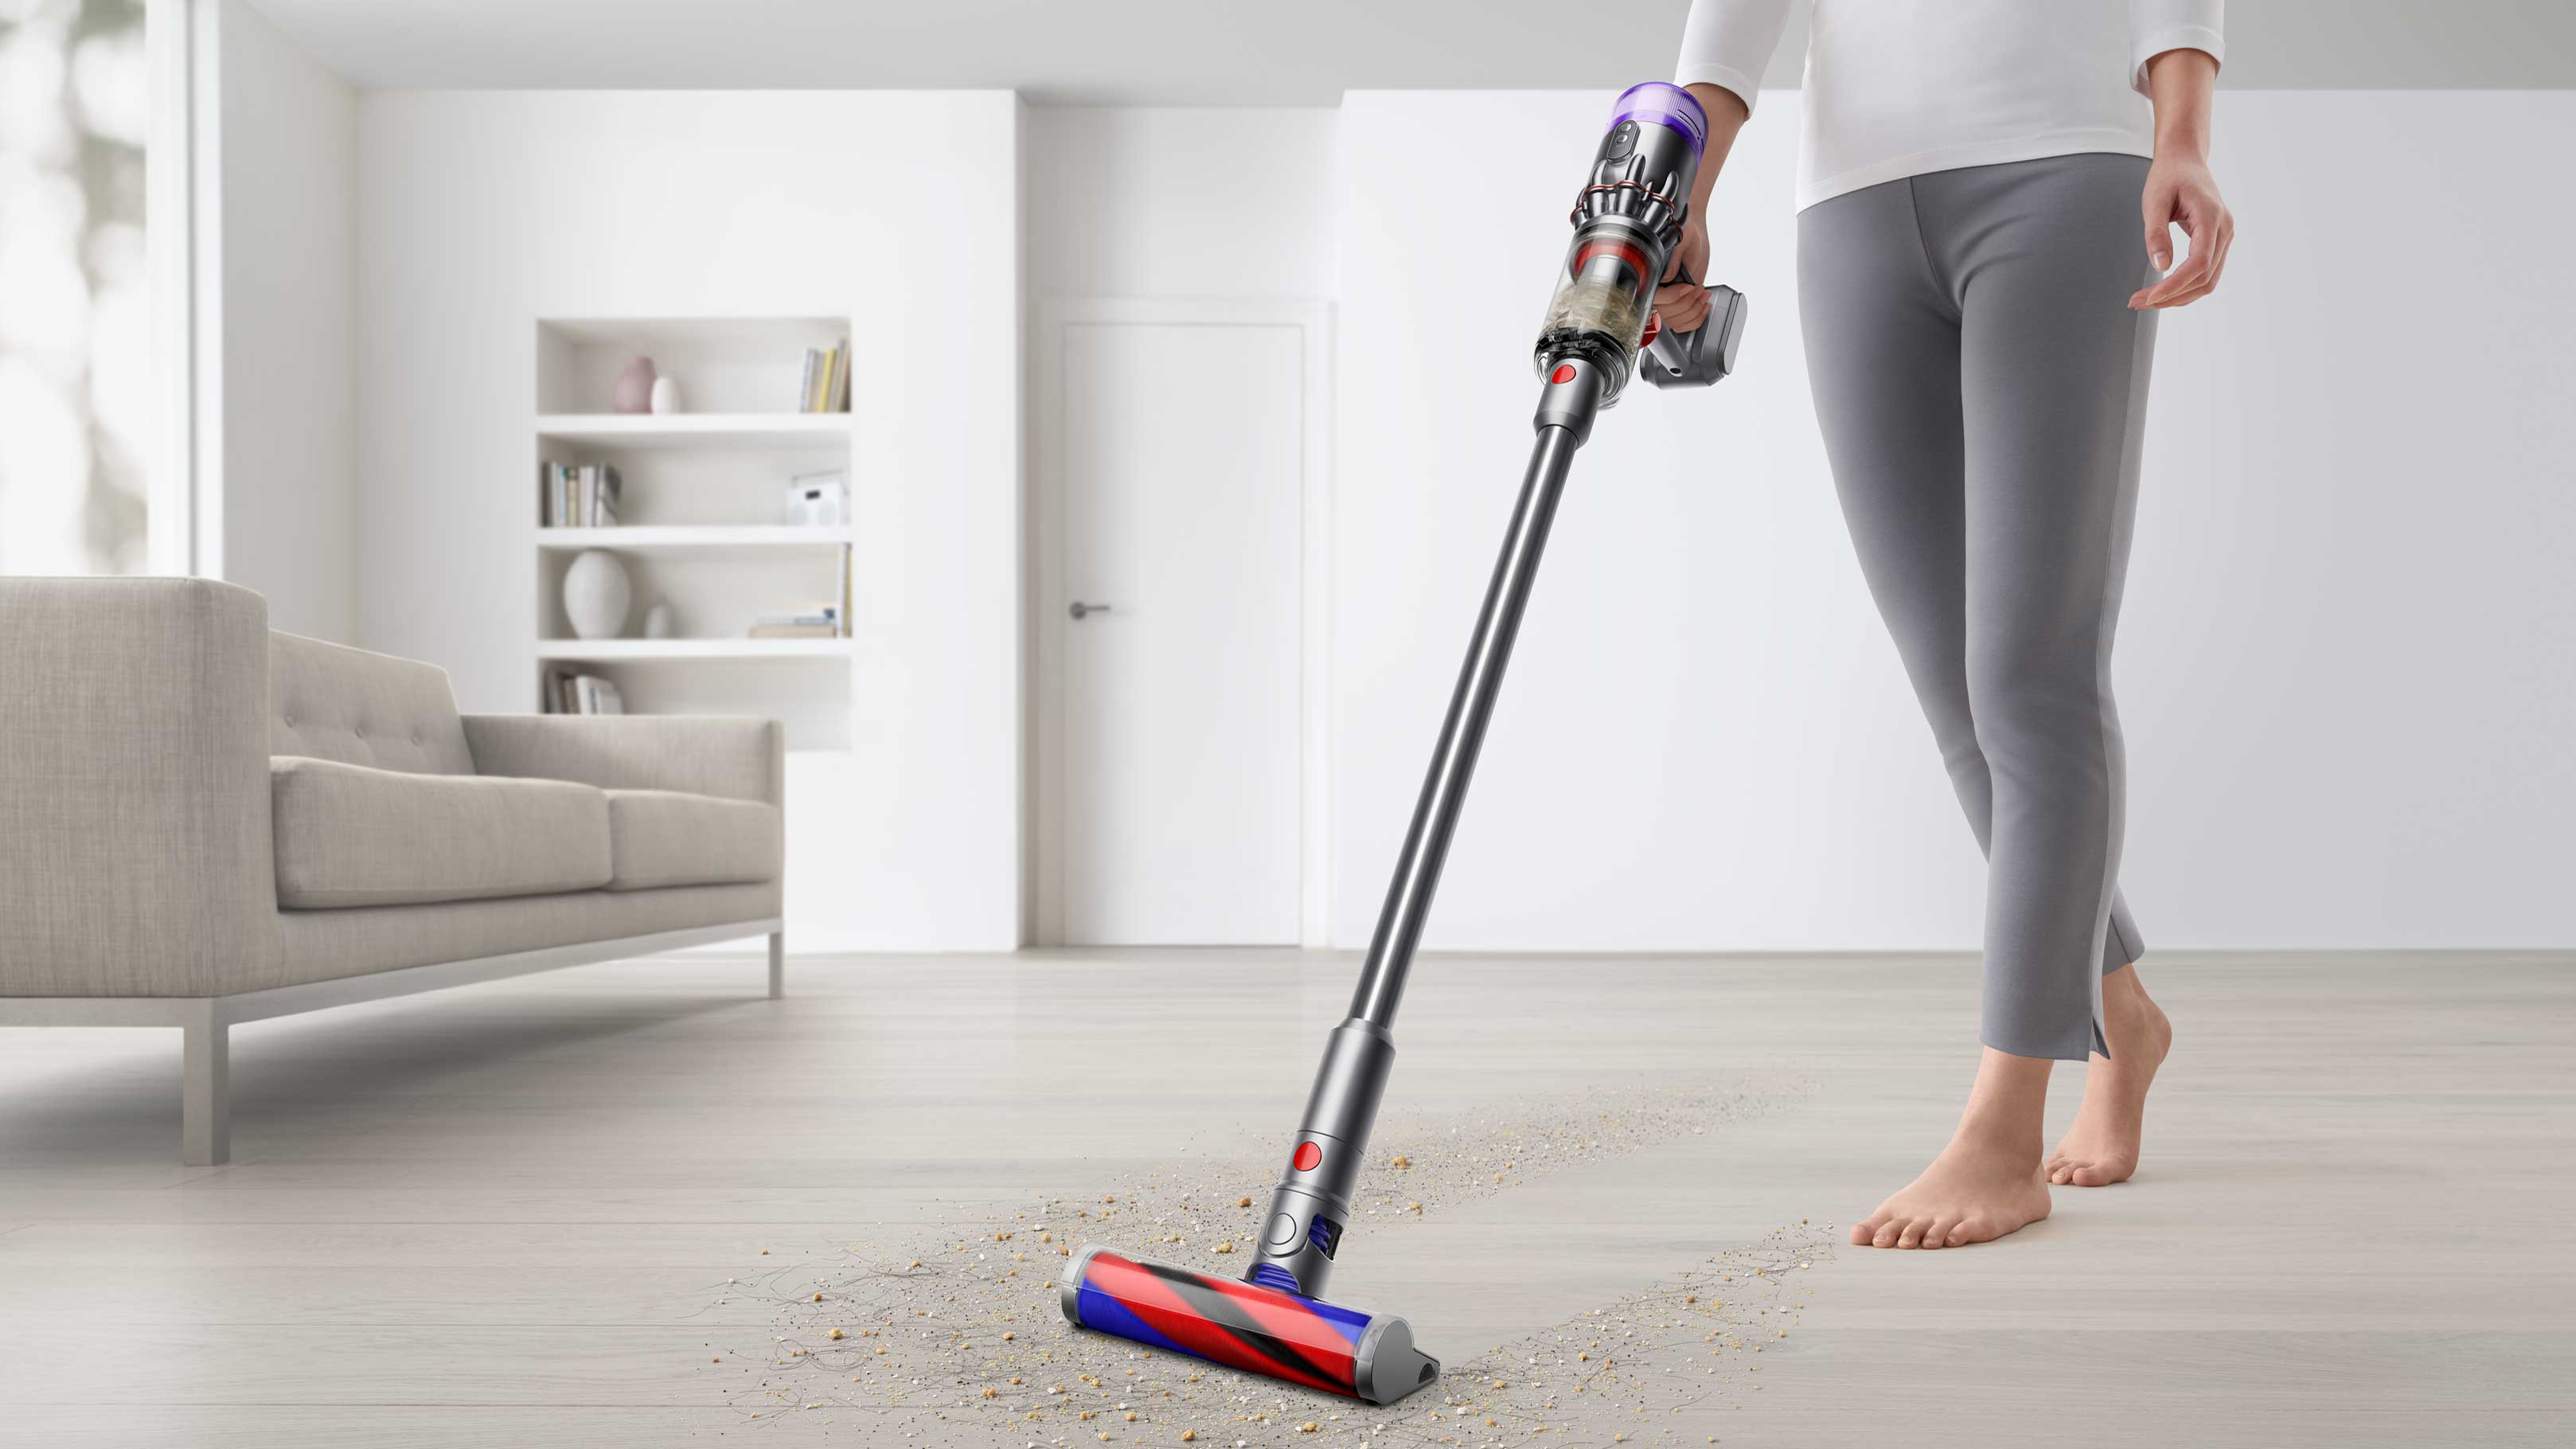 Dyson stick vacuum picking up crumbs